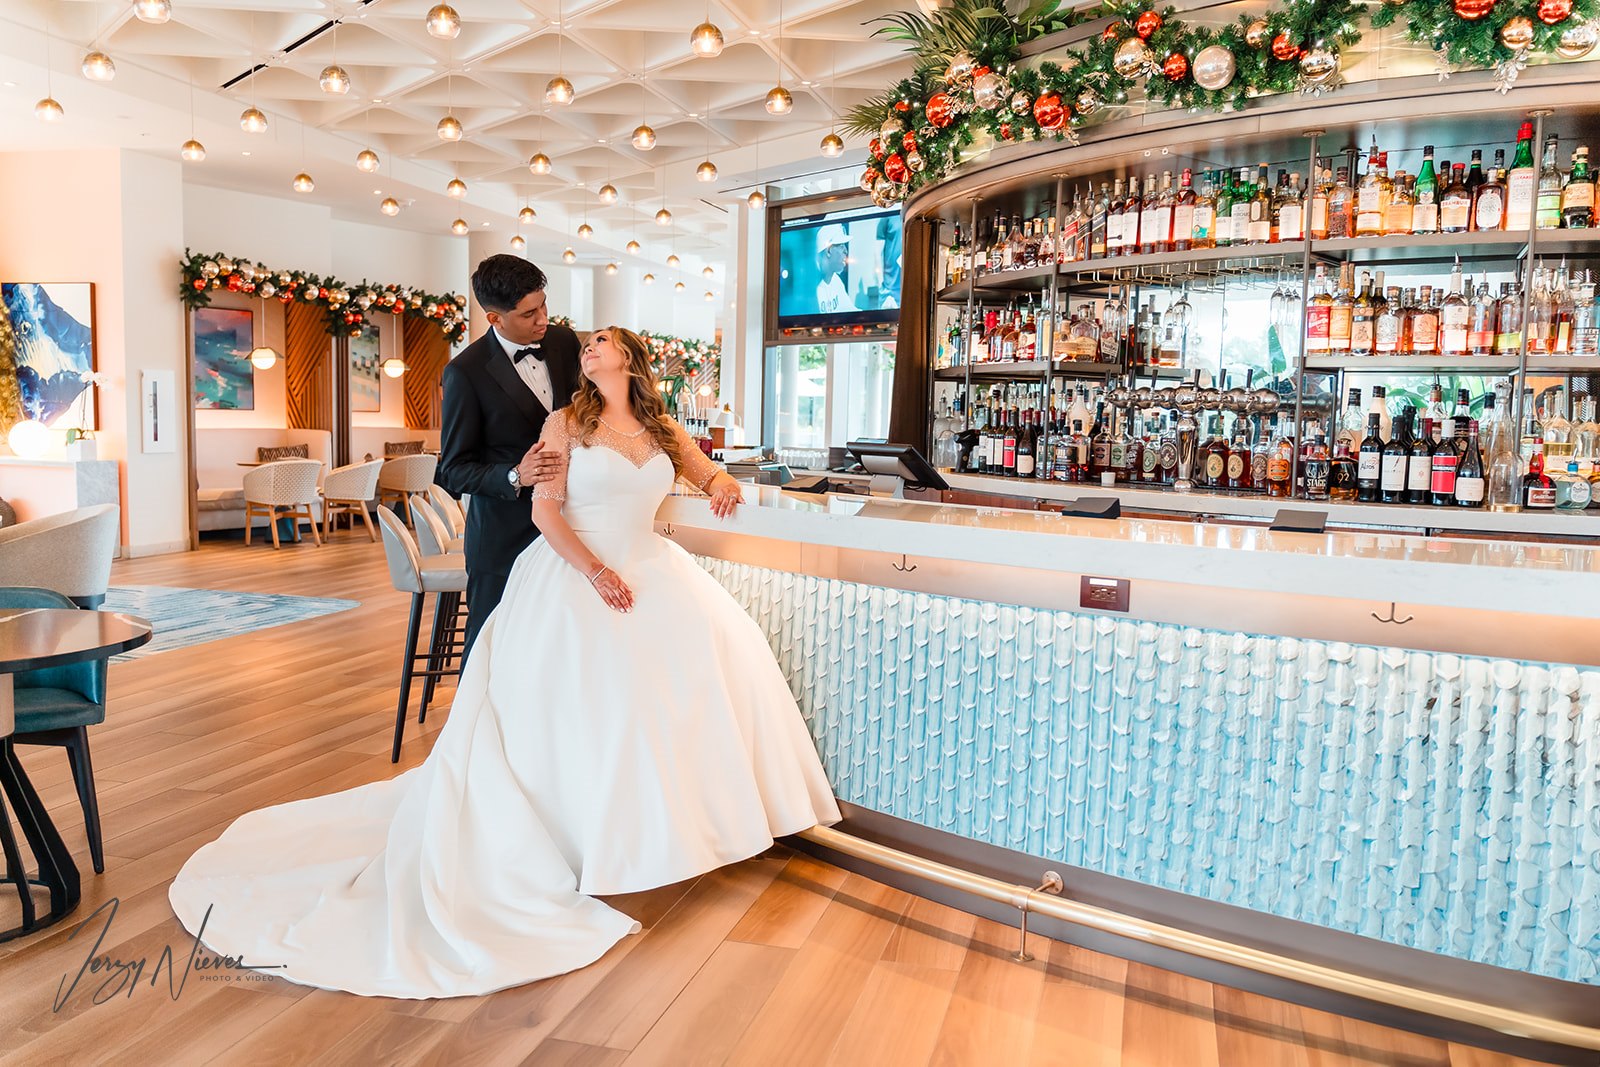 Ravin and Nicole wearing traditional American wedding attire, looking into each other's eyes at the elegant bar in Disney Swan Reserve.